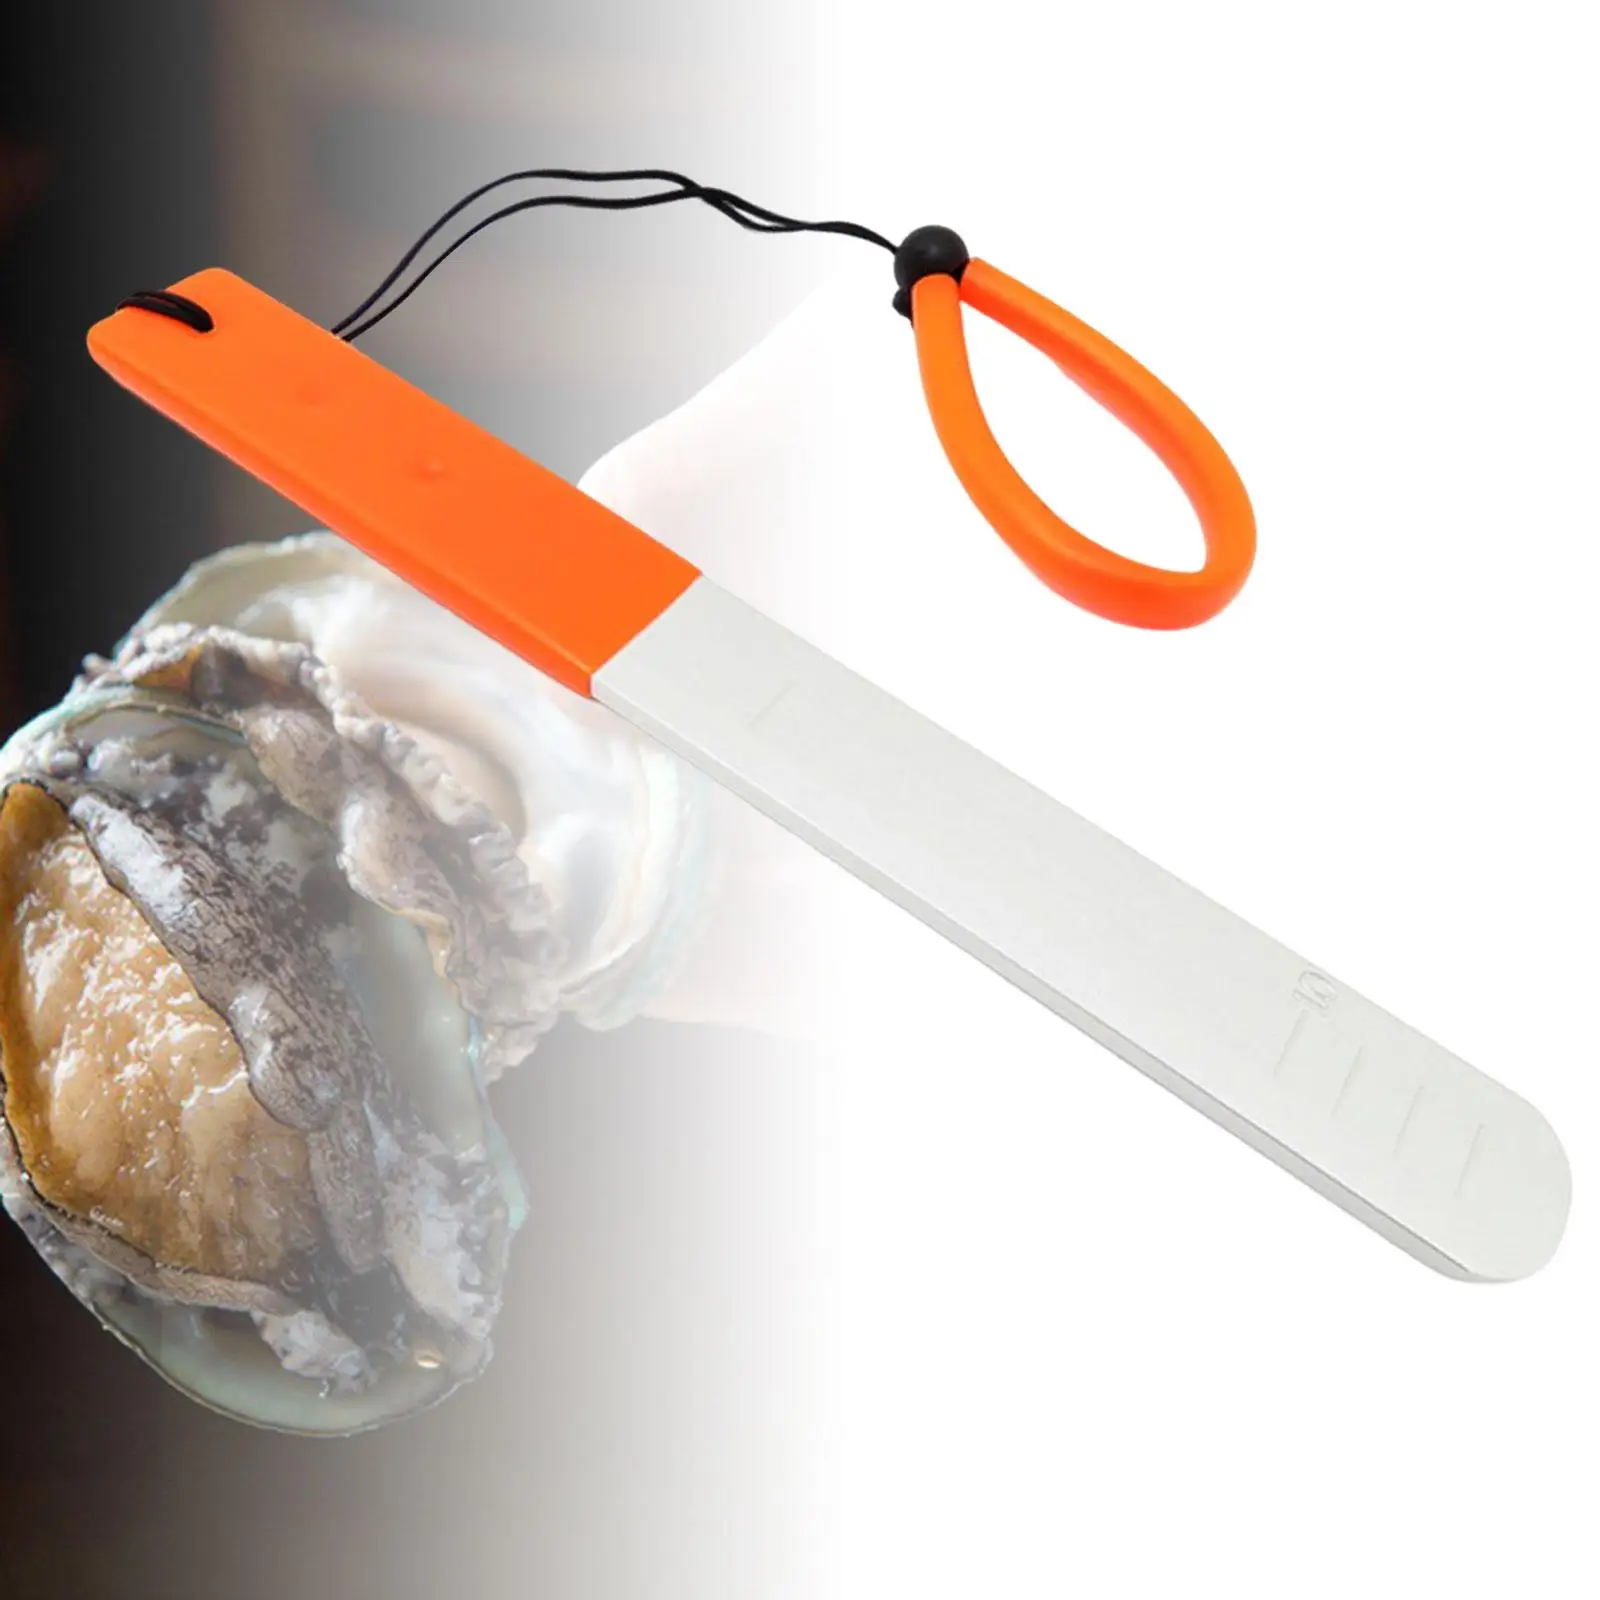 Scuba Diving Abalone Tool Aluminum with Scale Heavy Duty Abalone Measuring Ruler for Scuba Diving Equipment Abalone Measurement